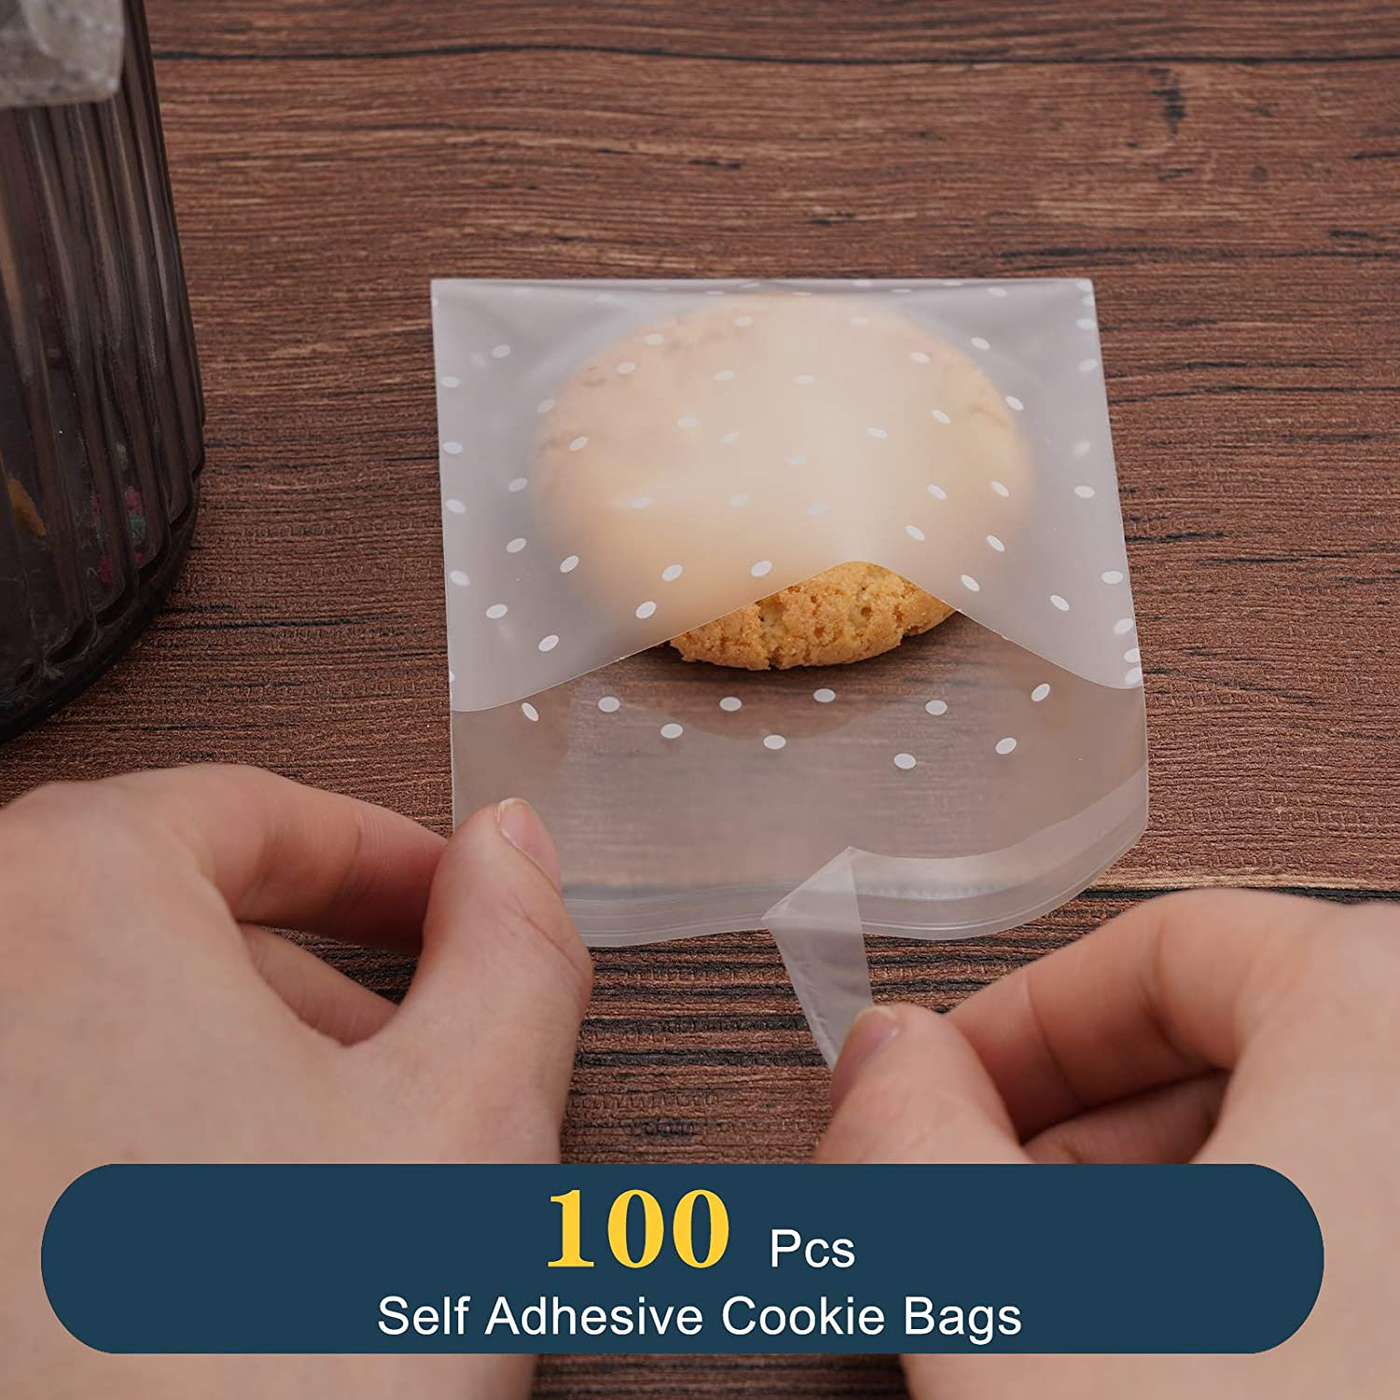 Self Adhesive Cookie Bags Treat Bags, Resealable Cellophane Bags, White Polka Dot Individual Cookie Bags with Thank You Stickers for Gift Giving